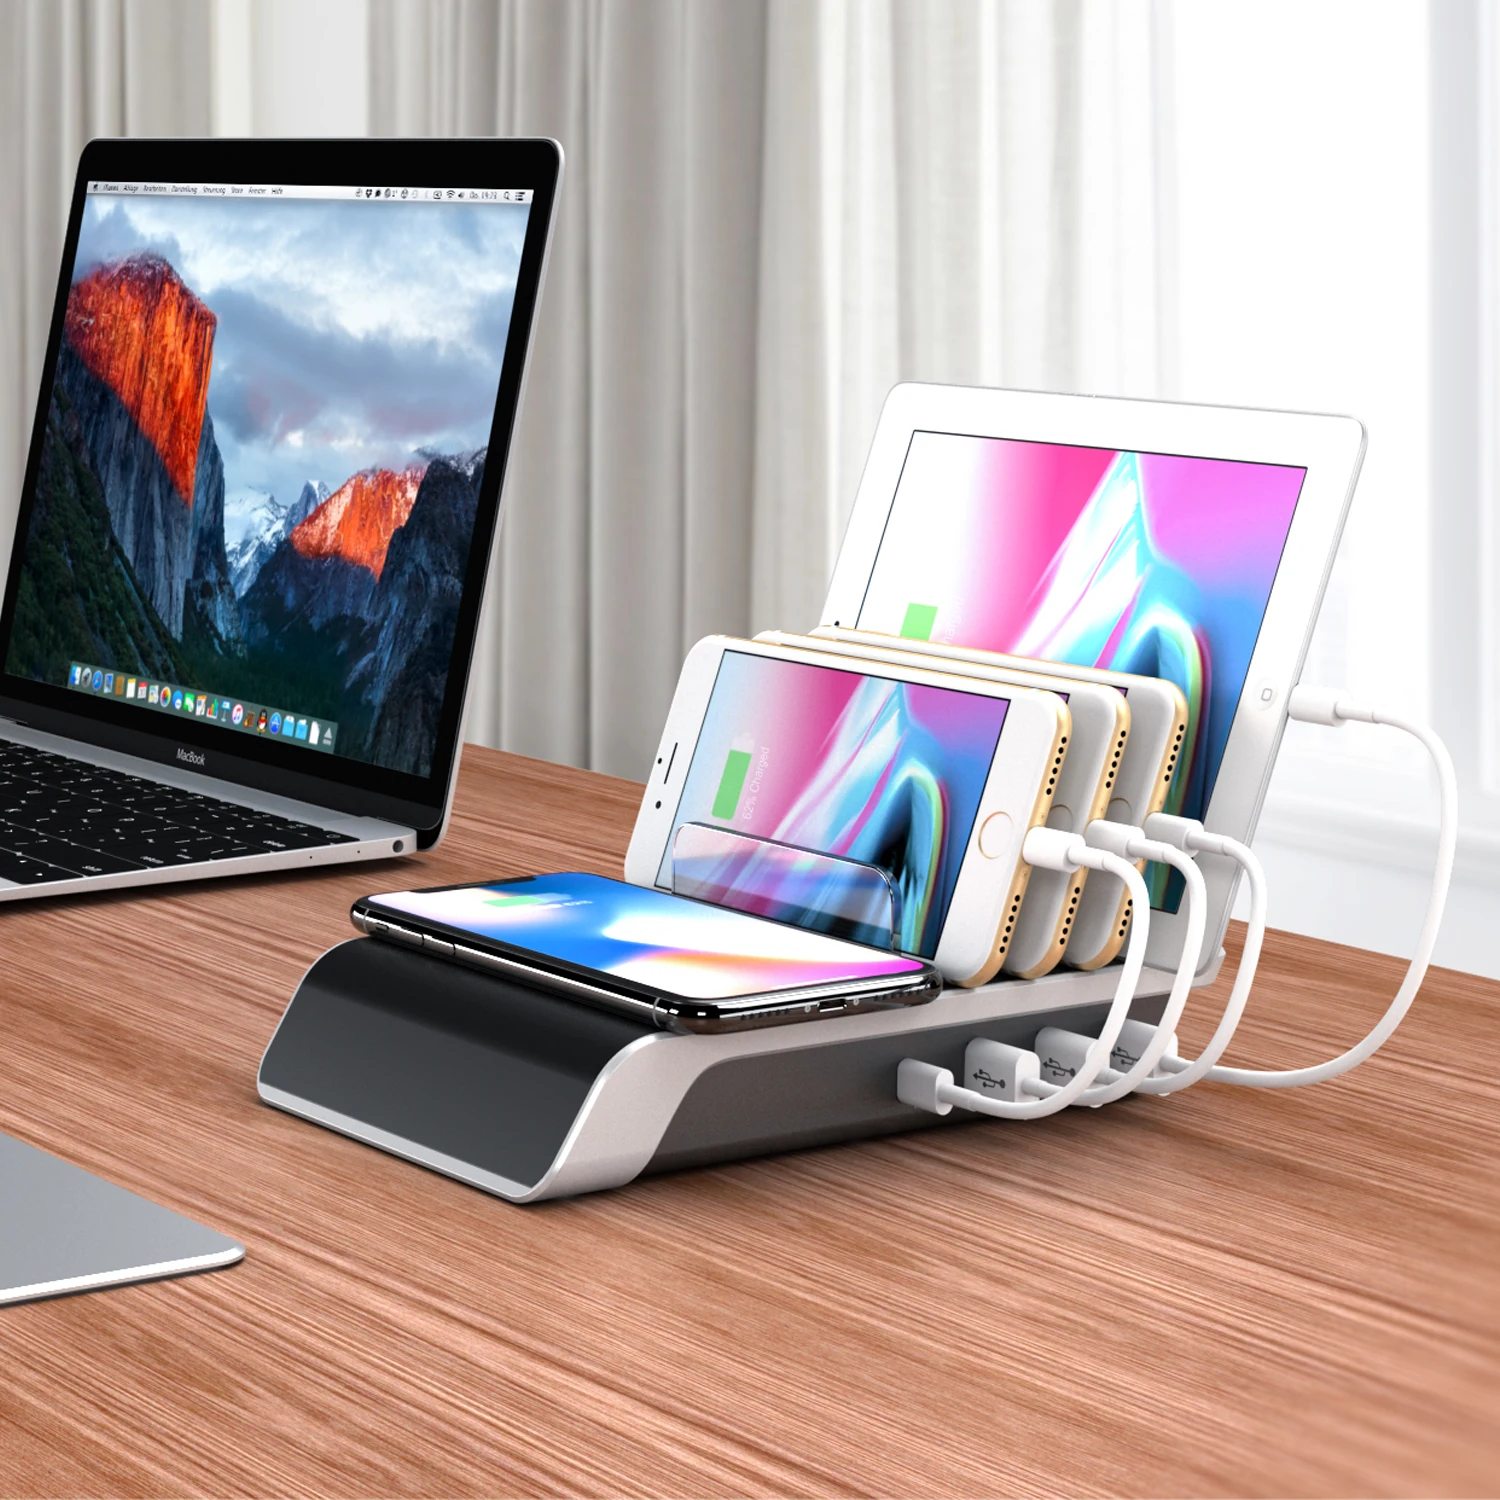 

Show Wish Desktop wireless charging station 5-in-1 multiple charger dock organizer stand with 4 USB ports for all mobile phones, Black